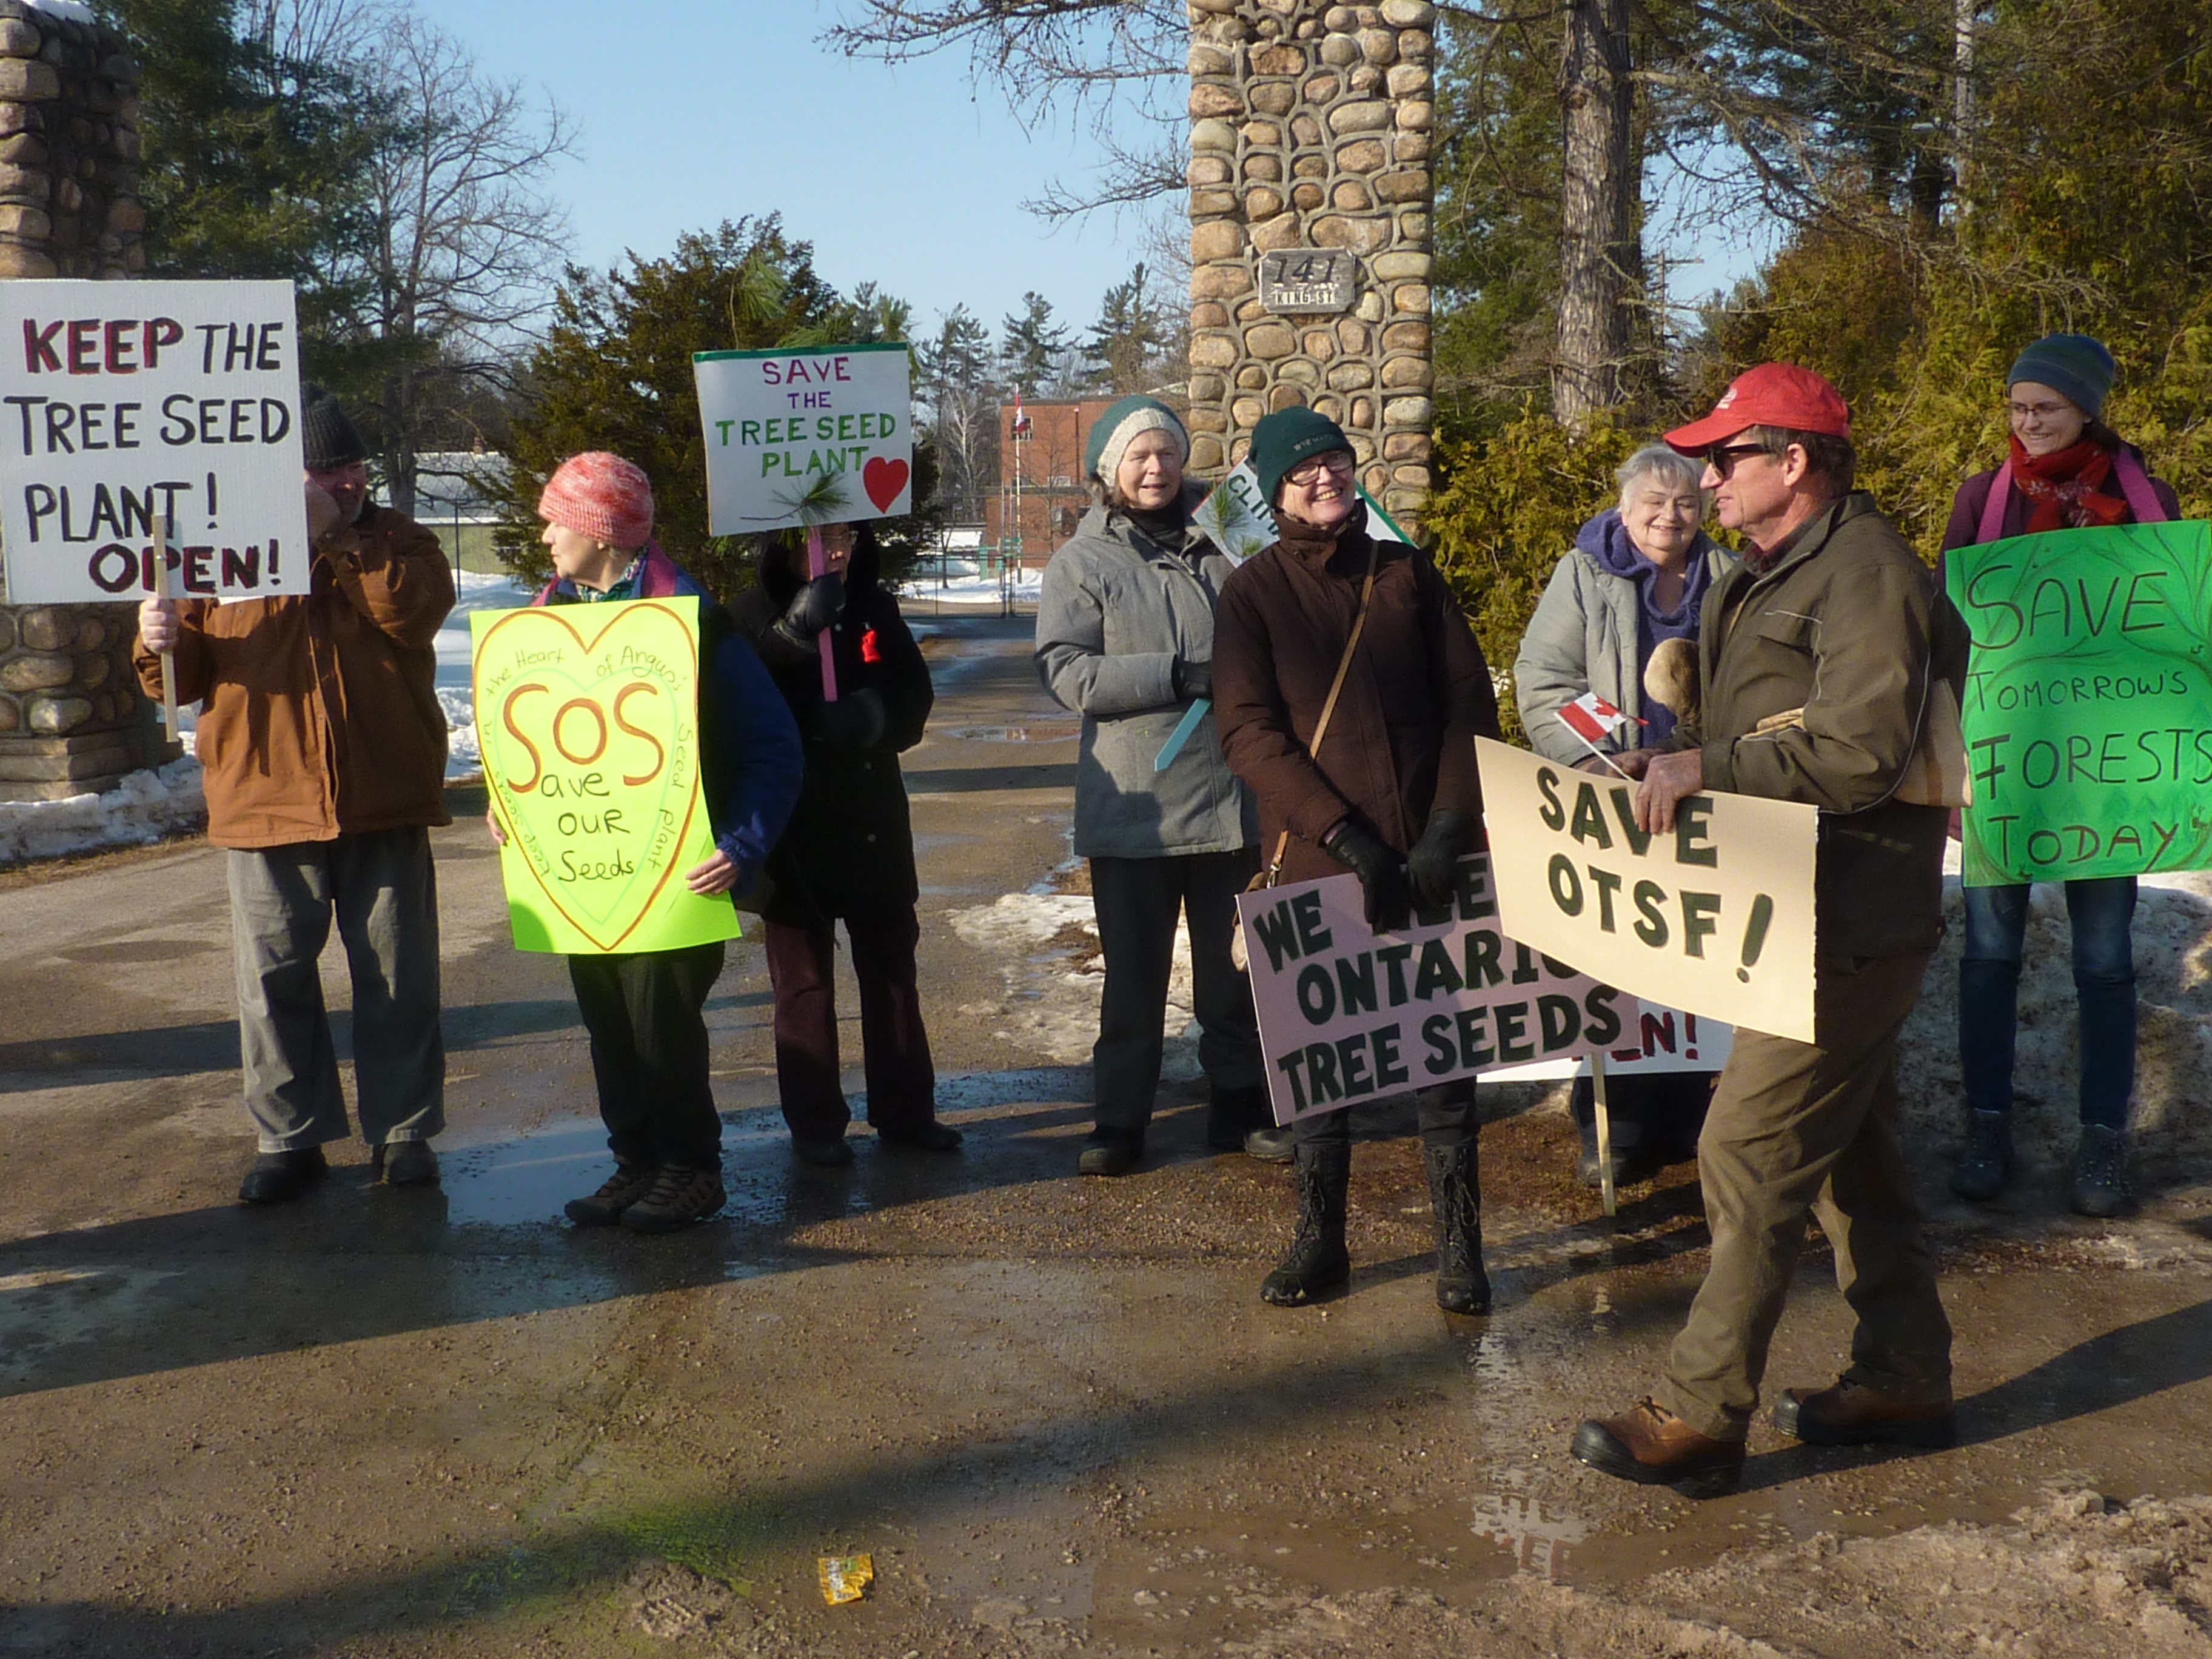 Protest outside the Ontario Tree Seed Plant